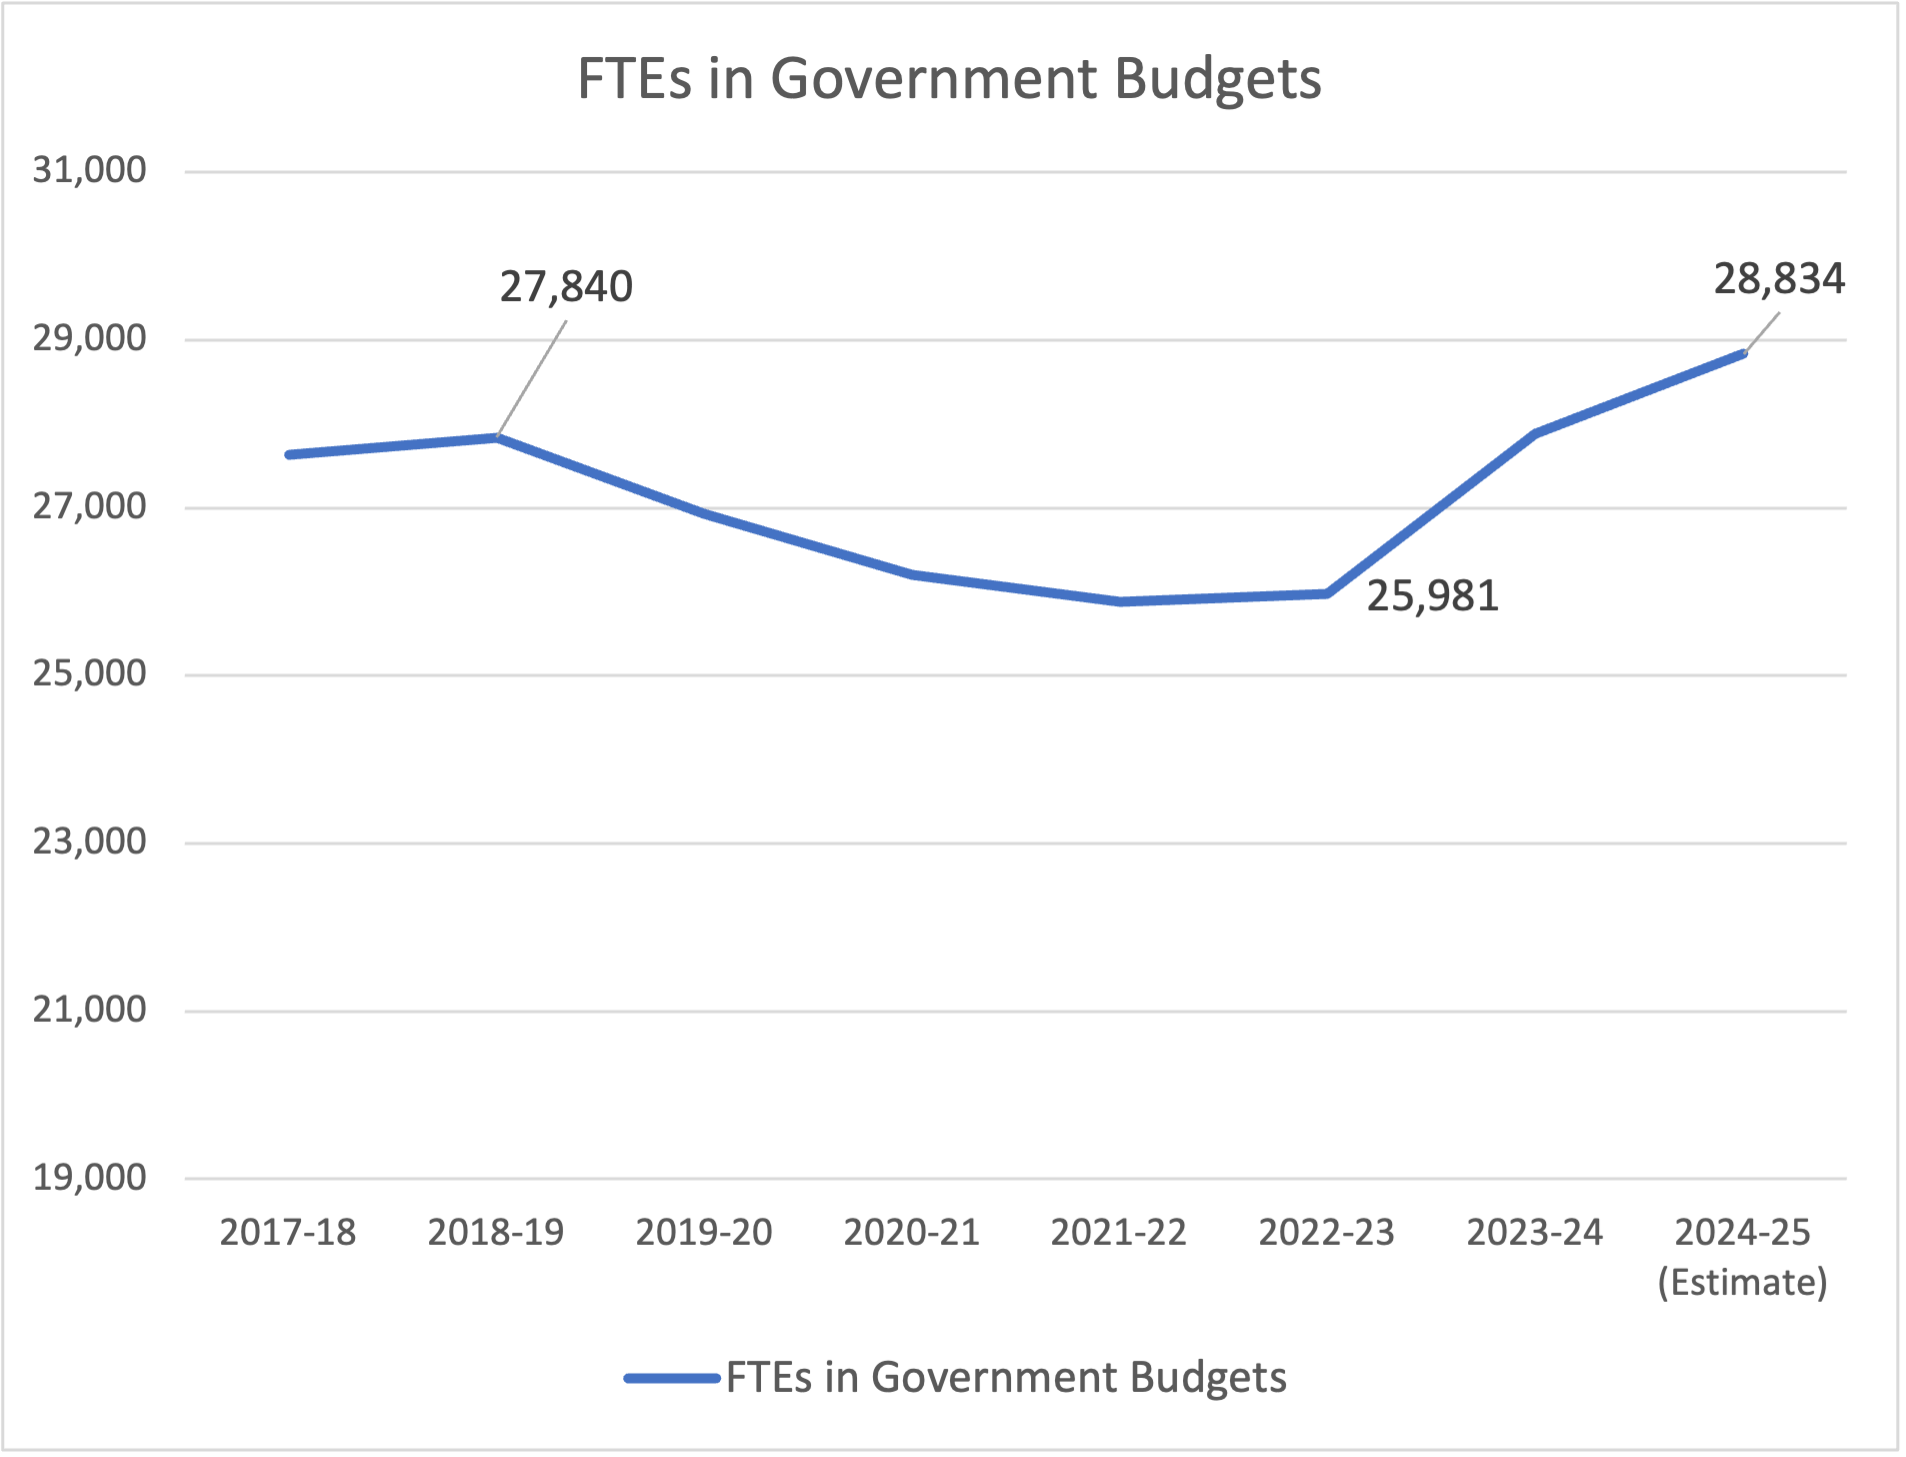 FTEs in Government Budgets